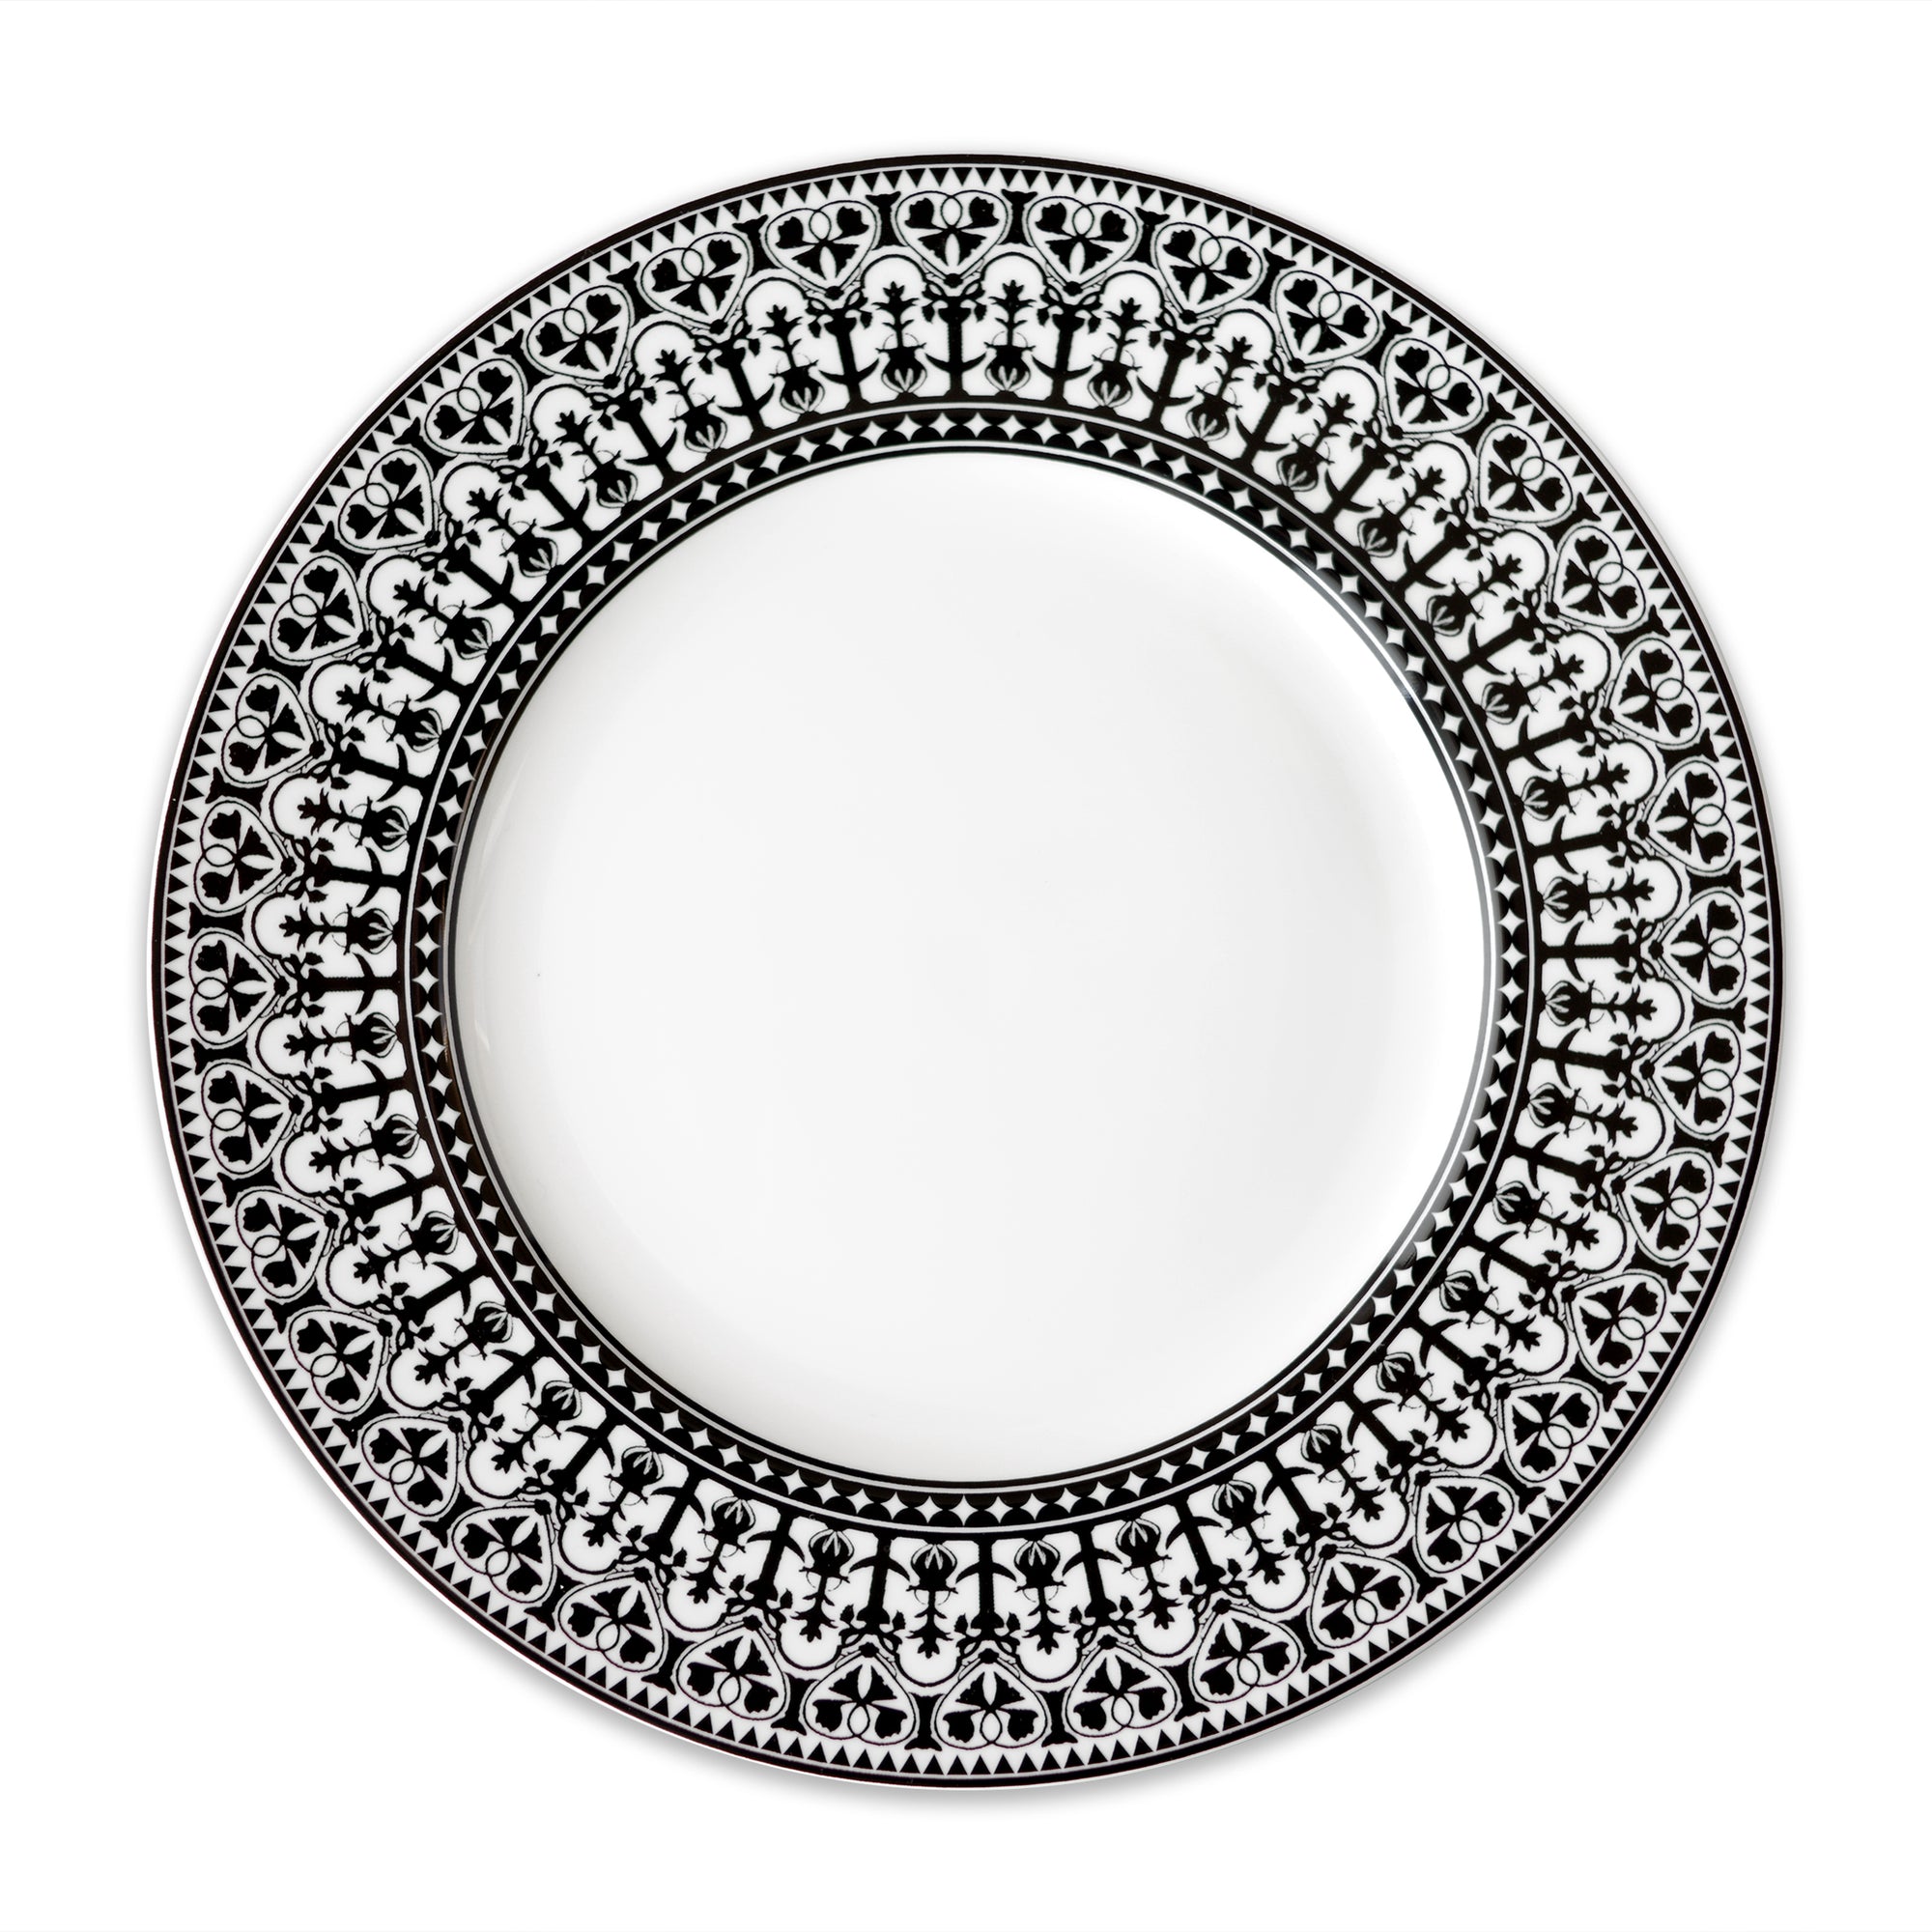 A Casablanca Rimmed Dinner Plate from Caskata Artisanal Home, featuring an intricate black floral pattern around the rim and hand-decorated details.